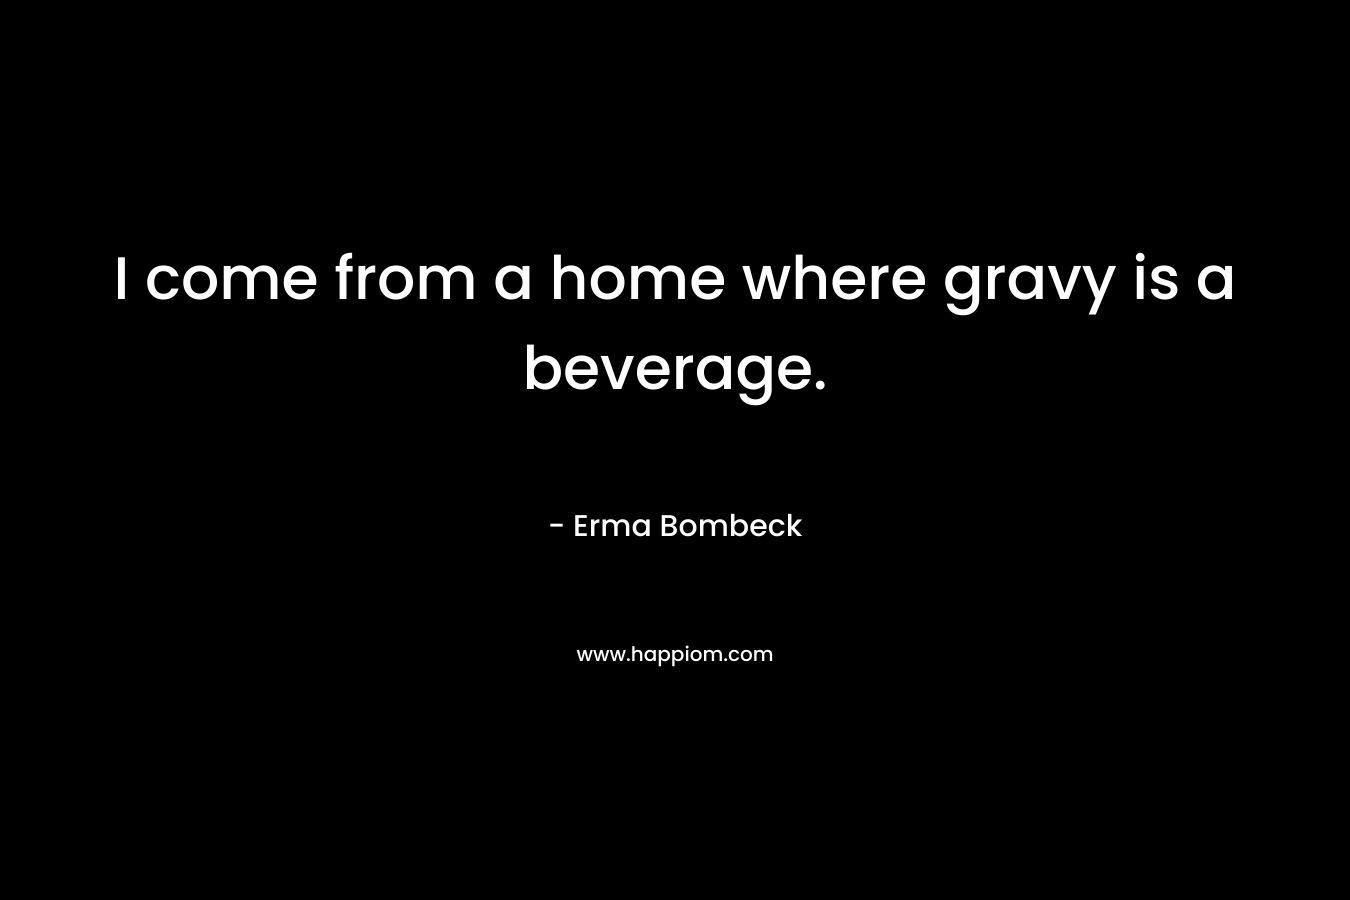 I come from a home where gravy is a beverage.